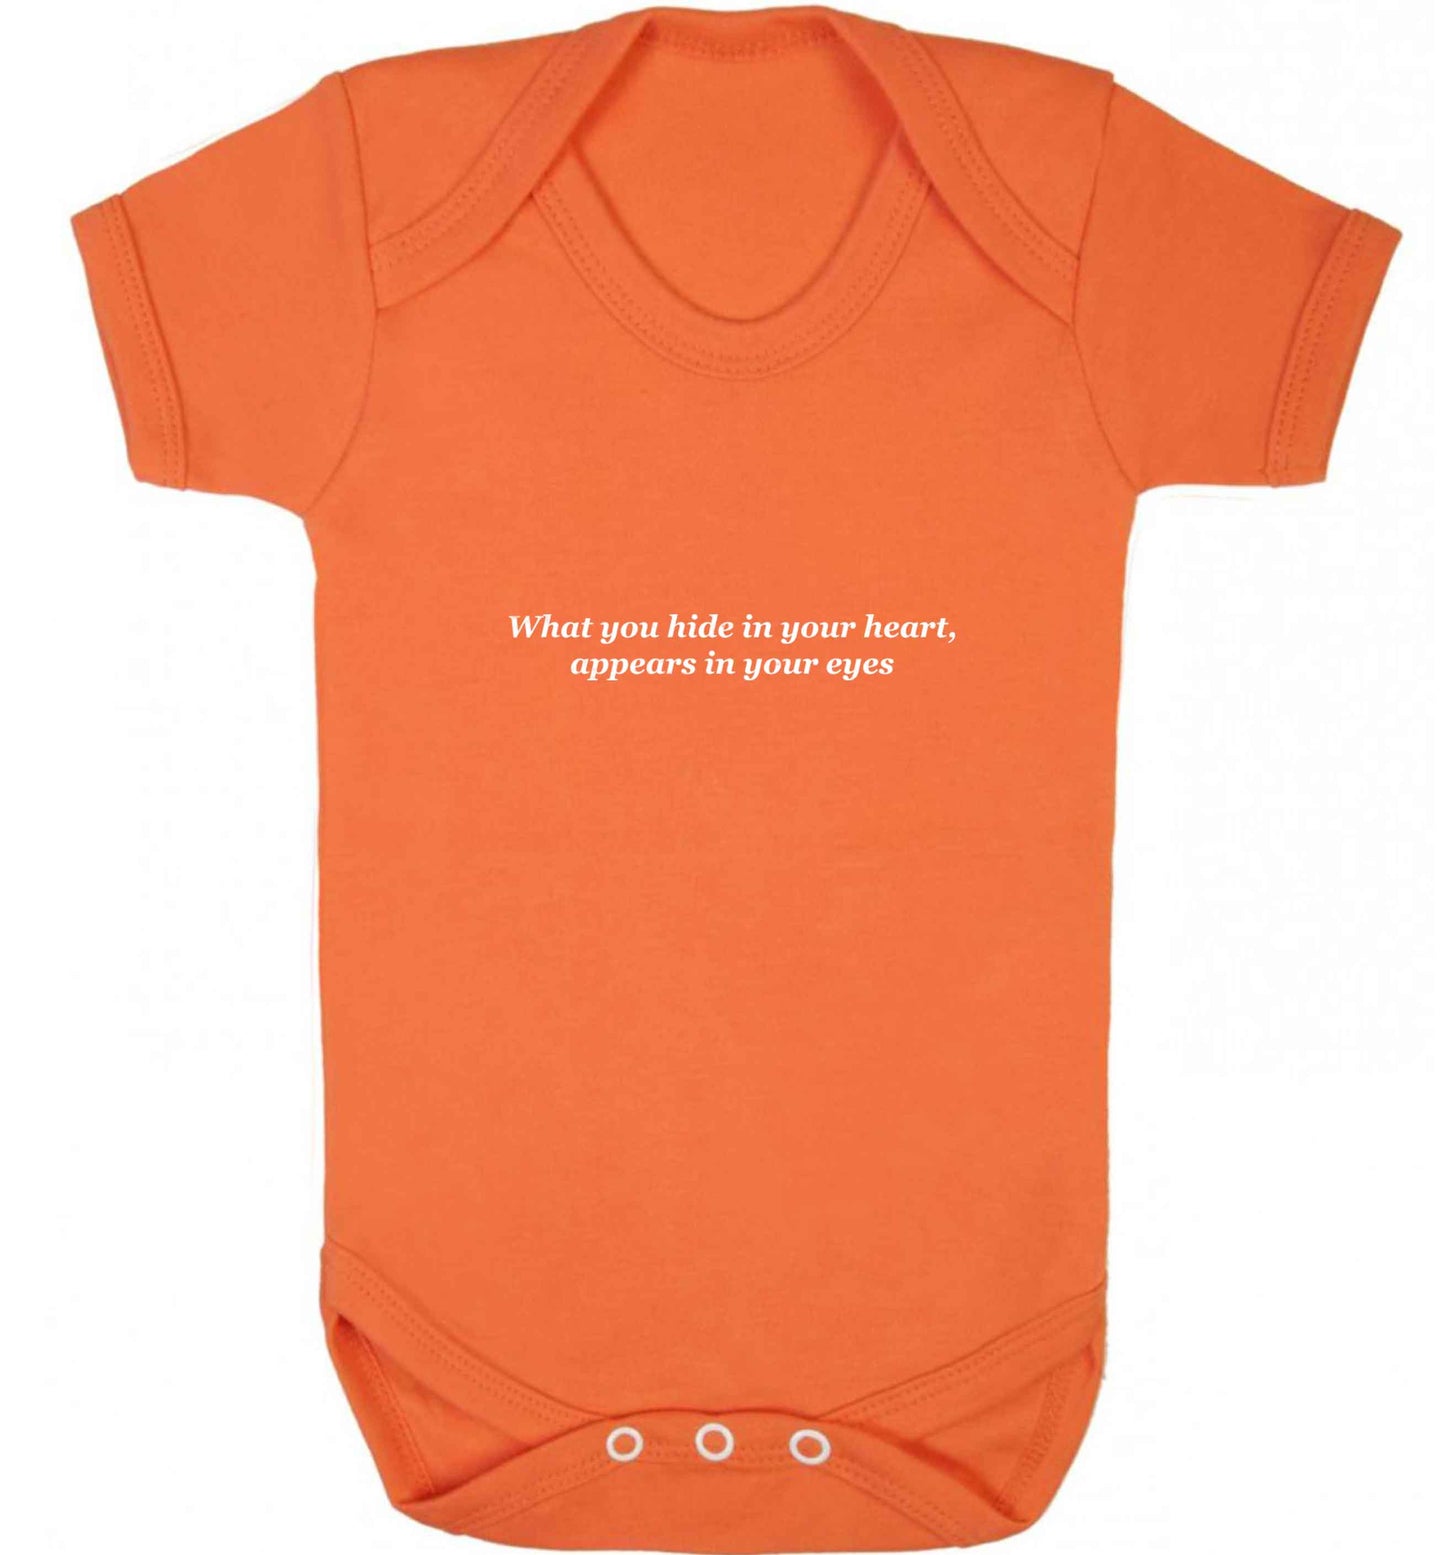 What you hide in your heart, appears in your eyes baby vest orange 18-24 months